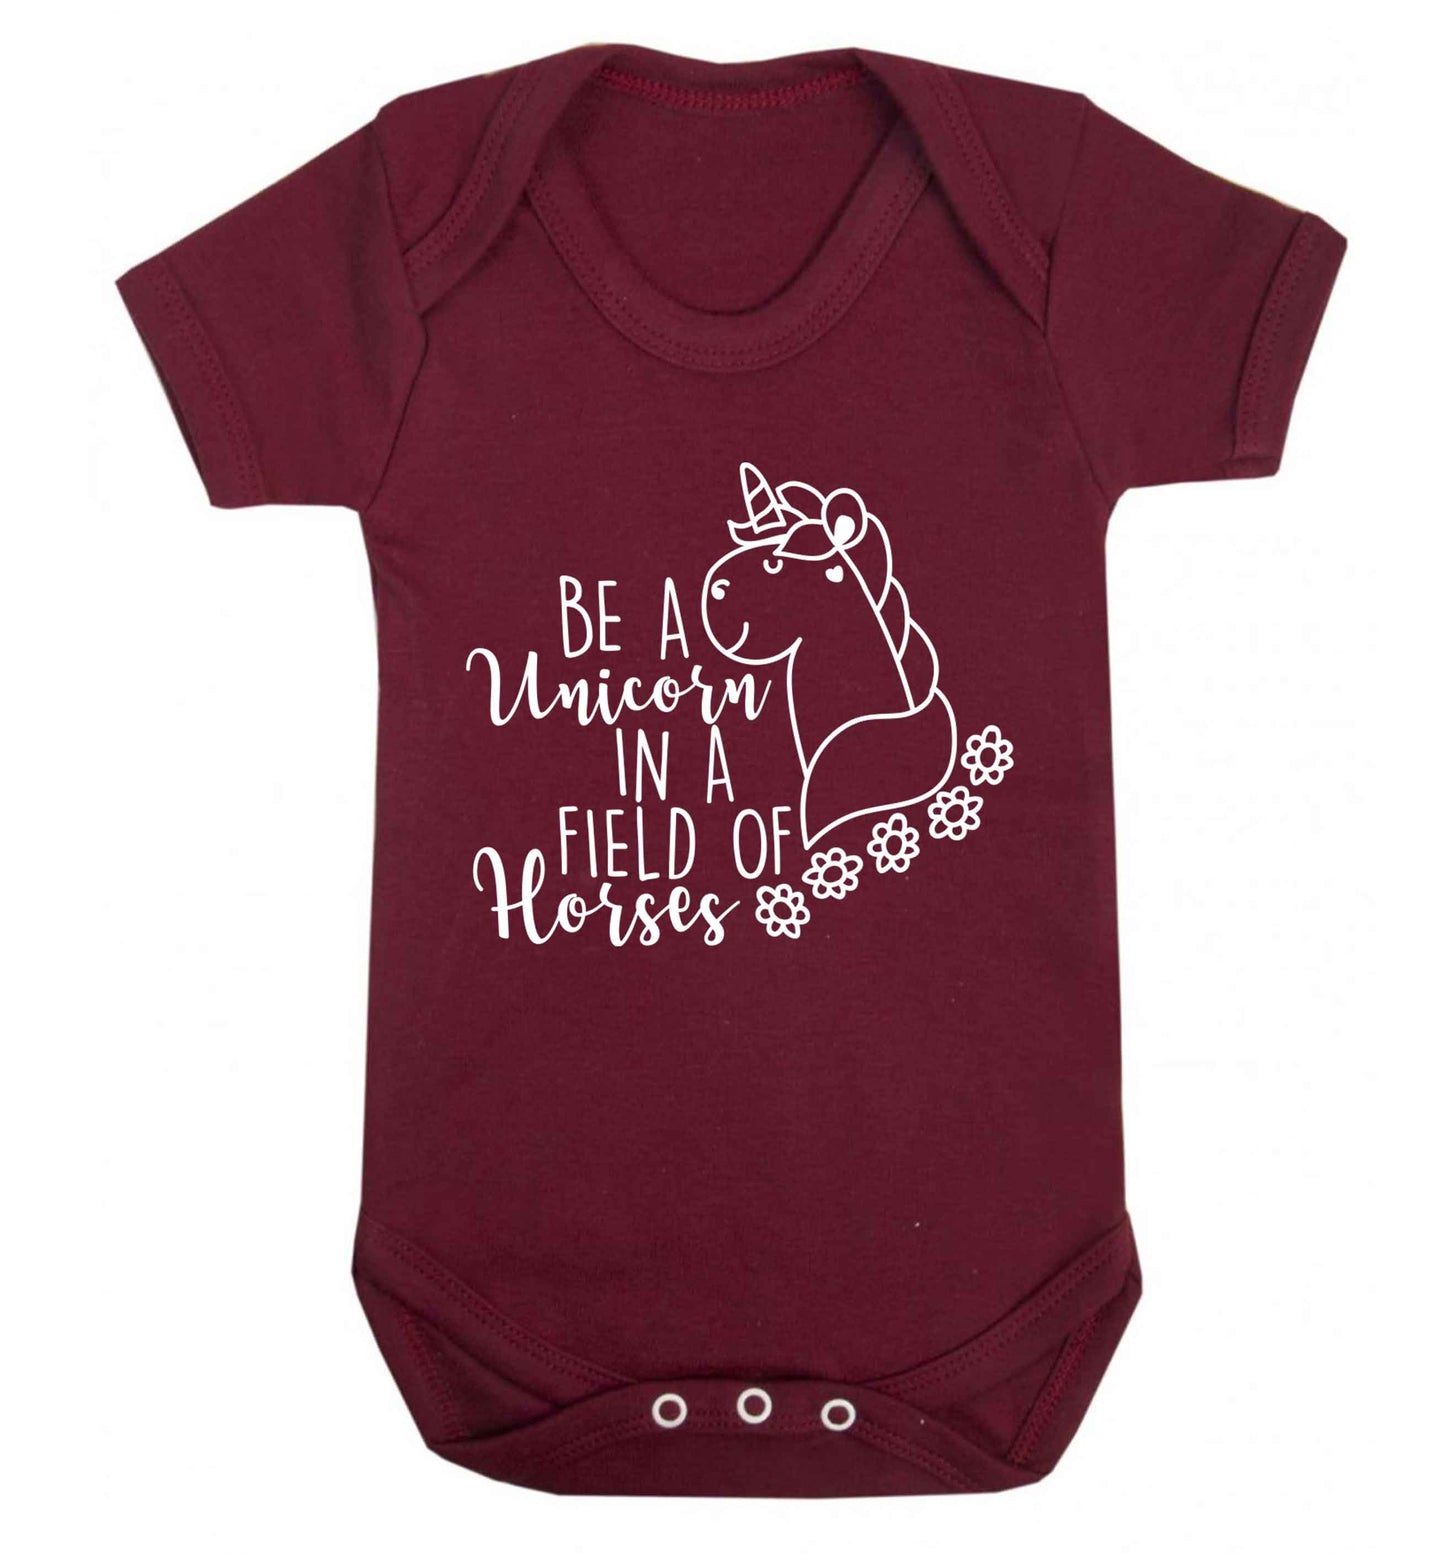 Be a unicorn in a field of horses Baby Vest maroon 18-24 months